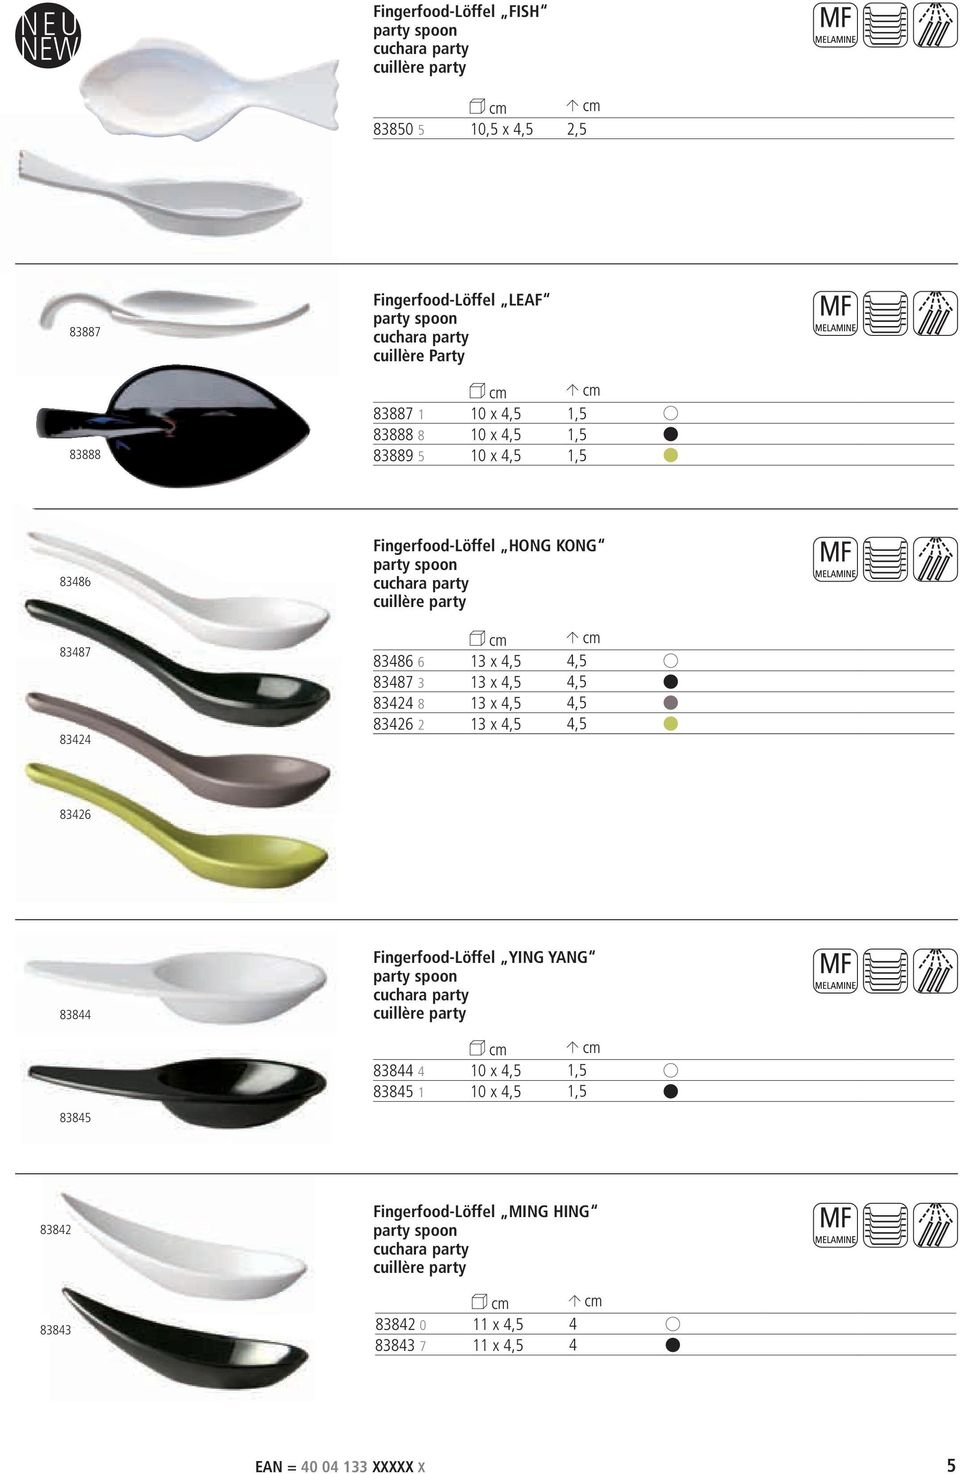 4,5 83487 3 13 x 4,5 4,5 83424 8 13 x 4,5 4,5 83426 2 13 x 4,5 4,5 83426 83844 83845 Fingerfood-Löffel YING YANG party spoon cuchara party cuillère party 83844 4 10 x